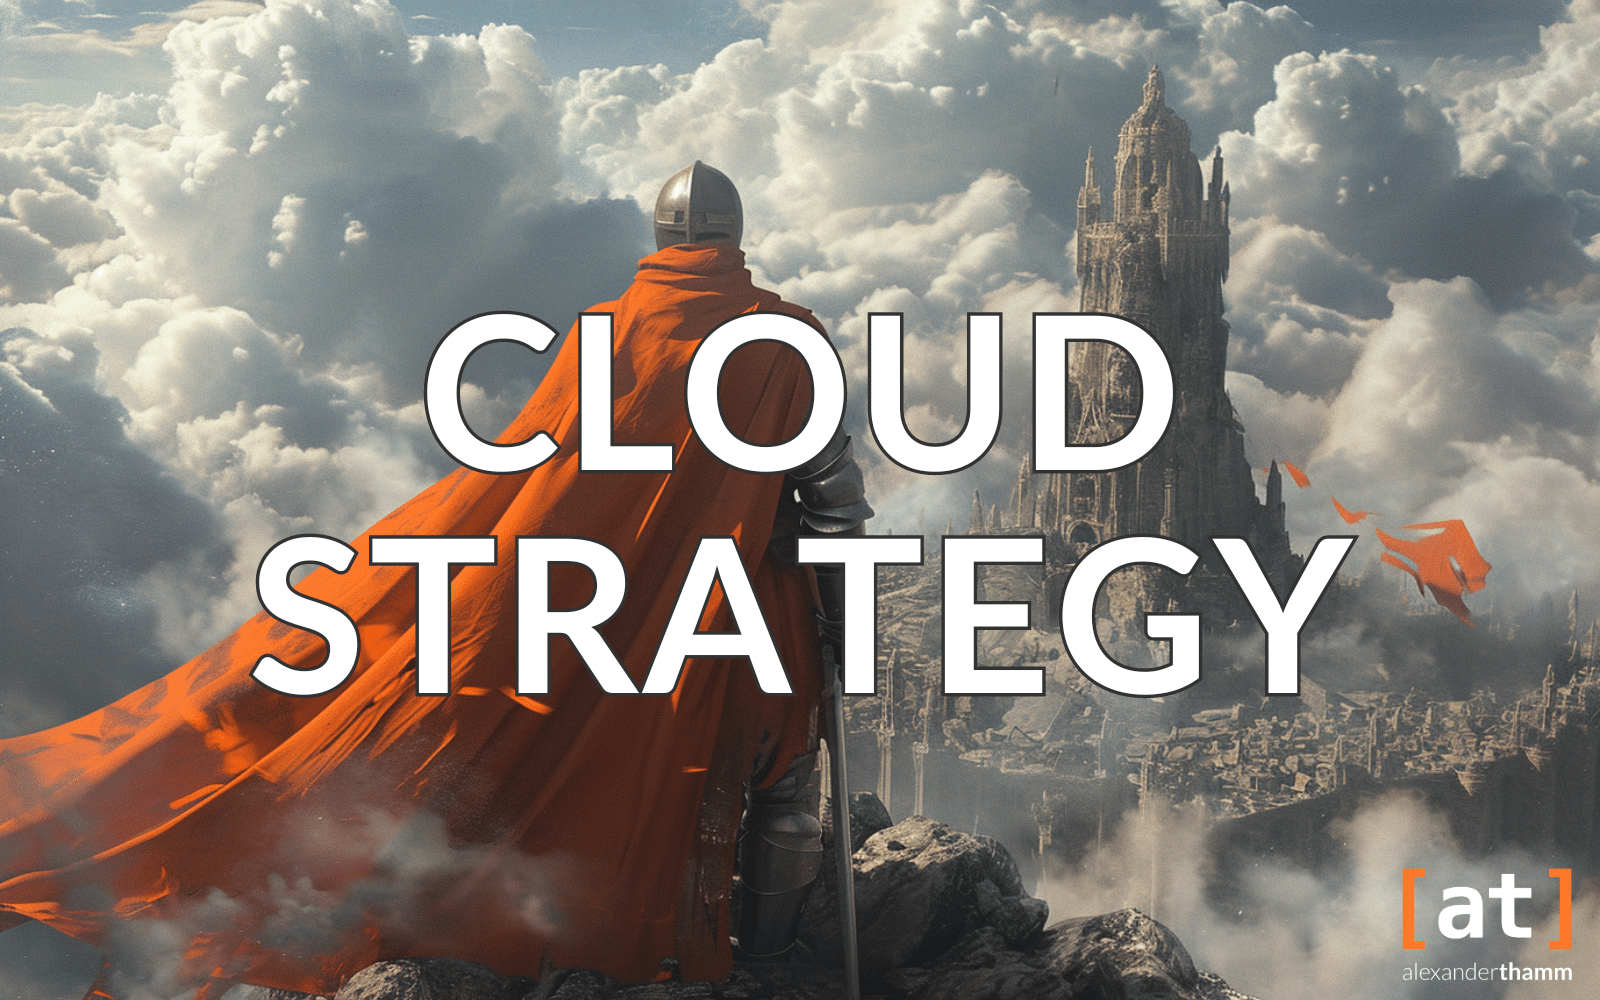 Cloud strategy, a knight with an orange cloak on a rocky outcrop, in the background a fortress with a large castle tower in an architecture of clouds